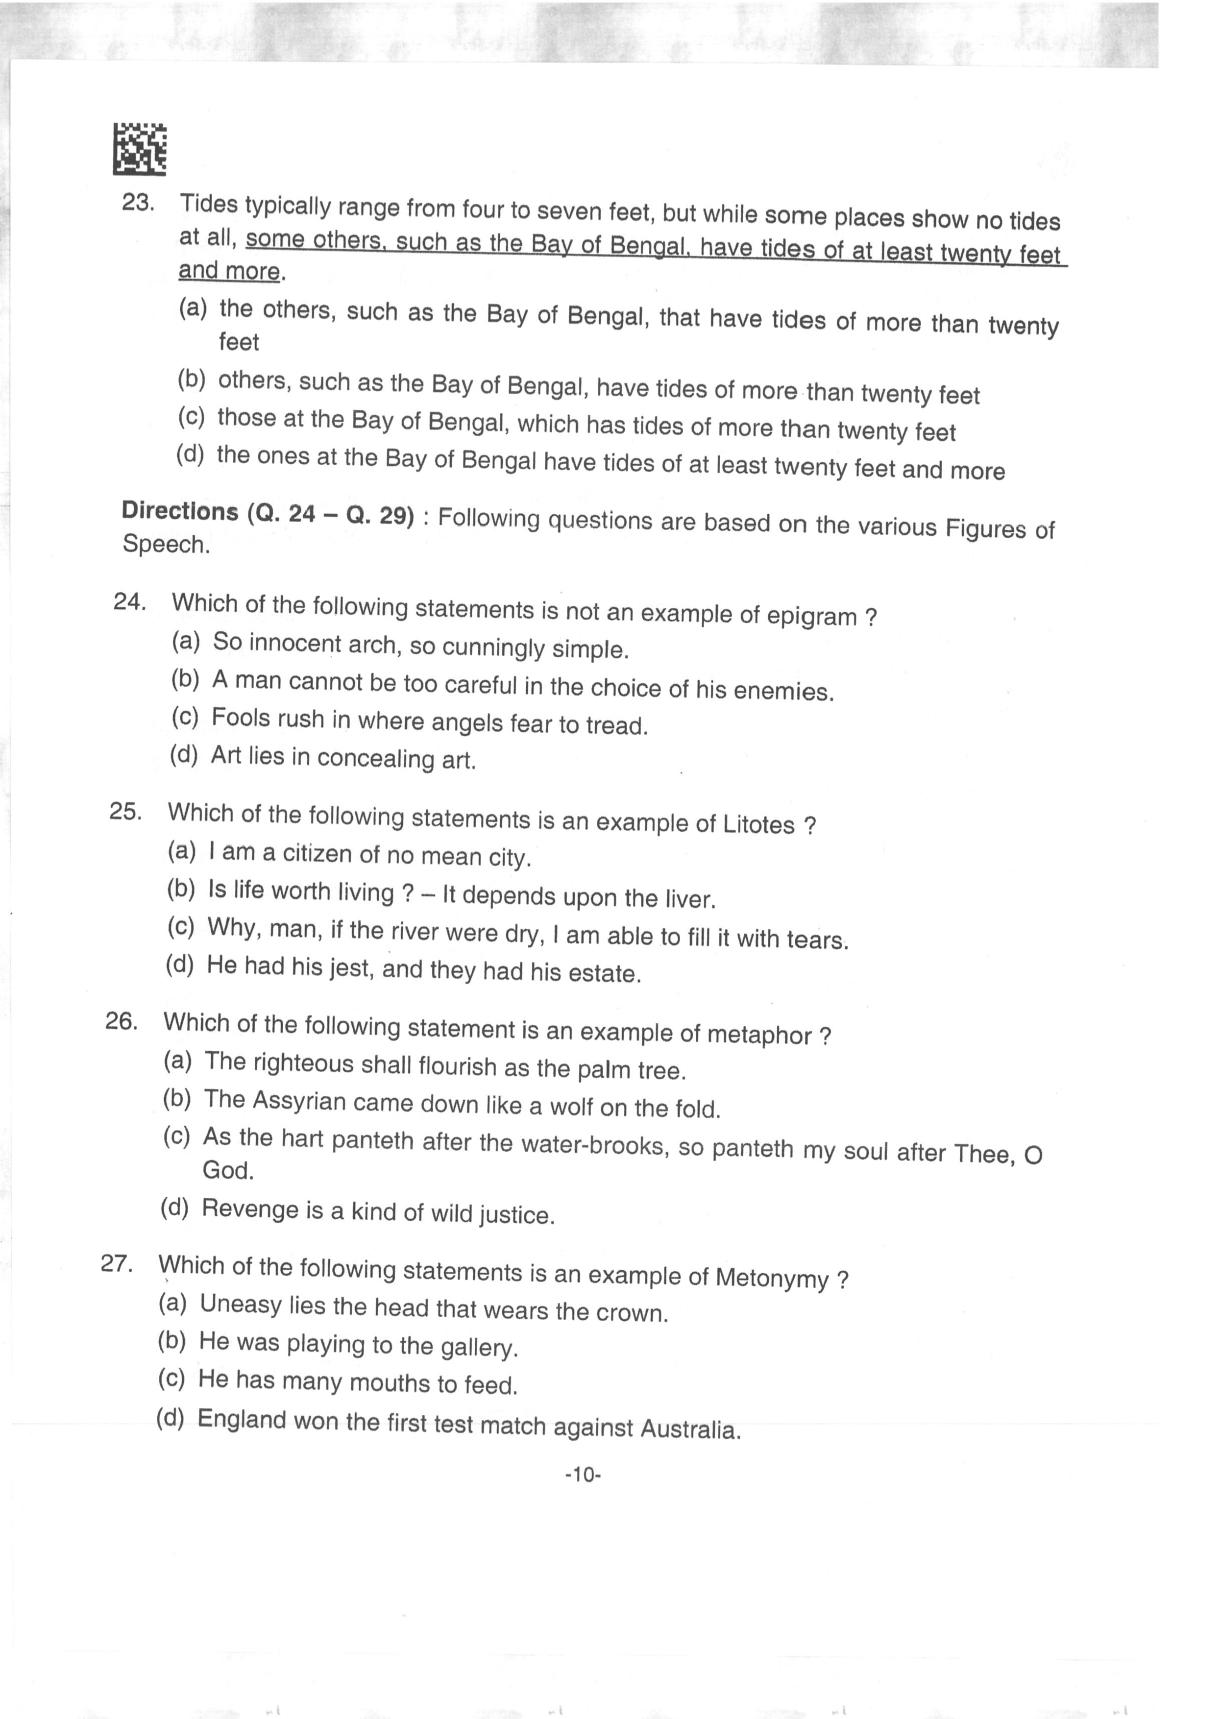 AILET 2019 Question Paper for BA LLB - Page 10